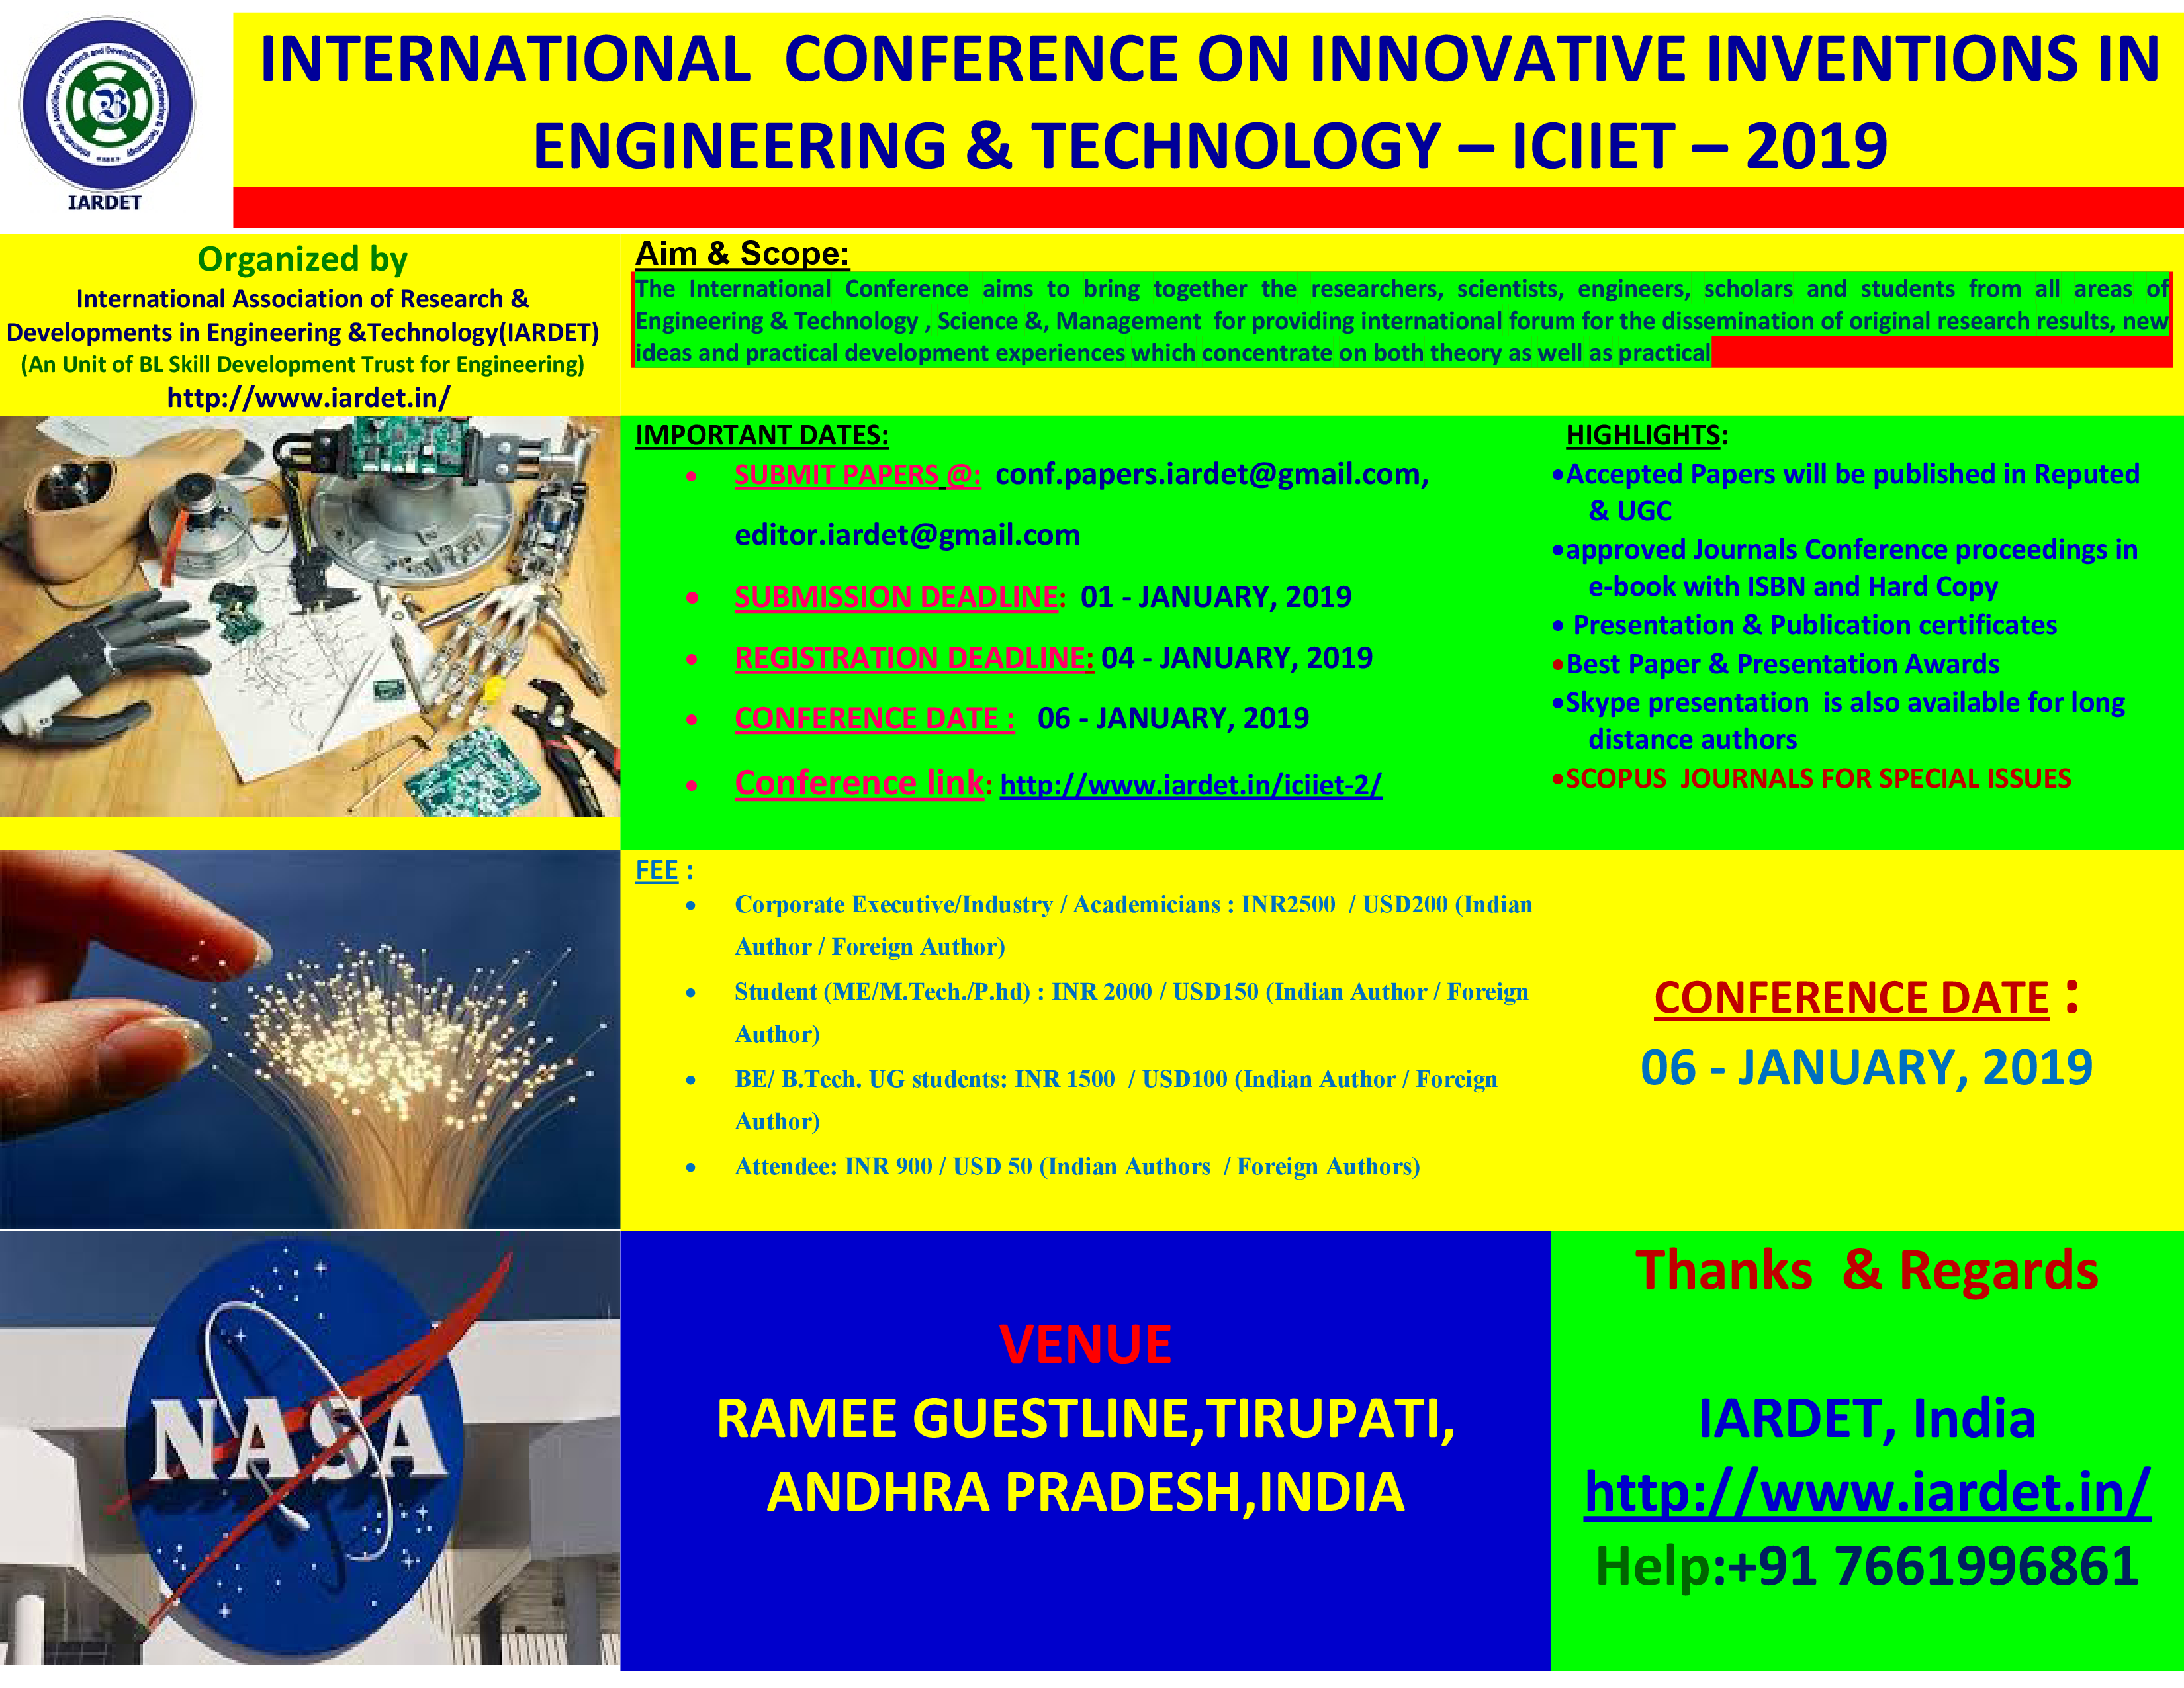 5th International Conference on Innovative Inventions in Engineering and Technology ICIIET 2019